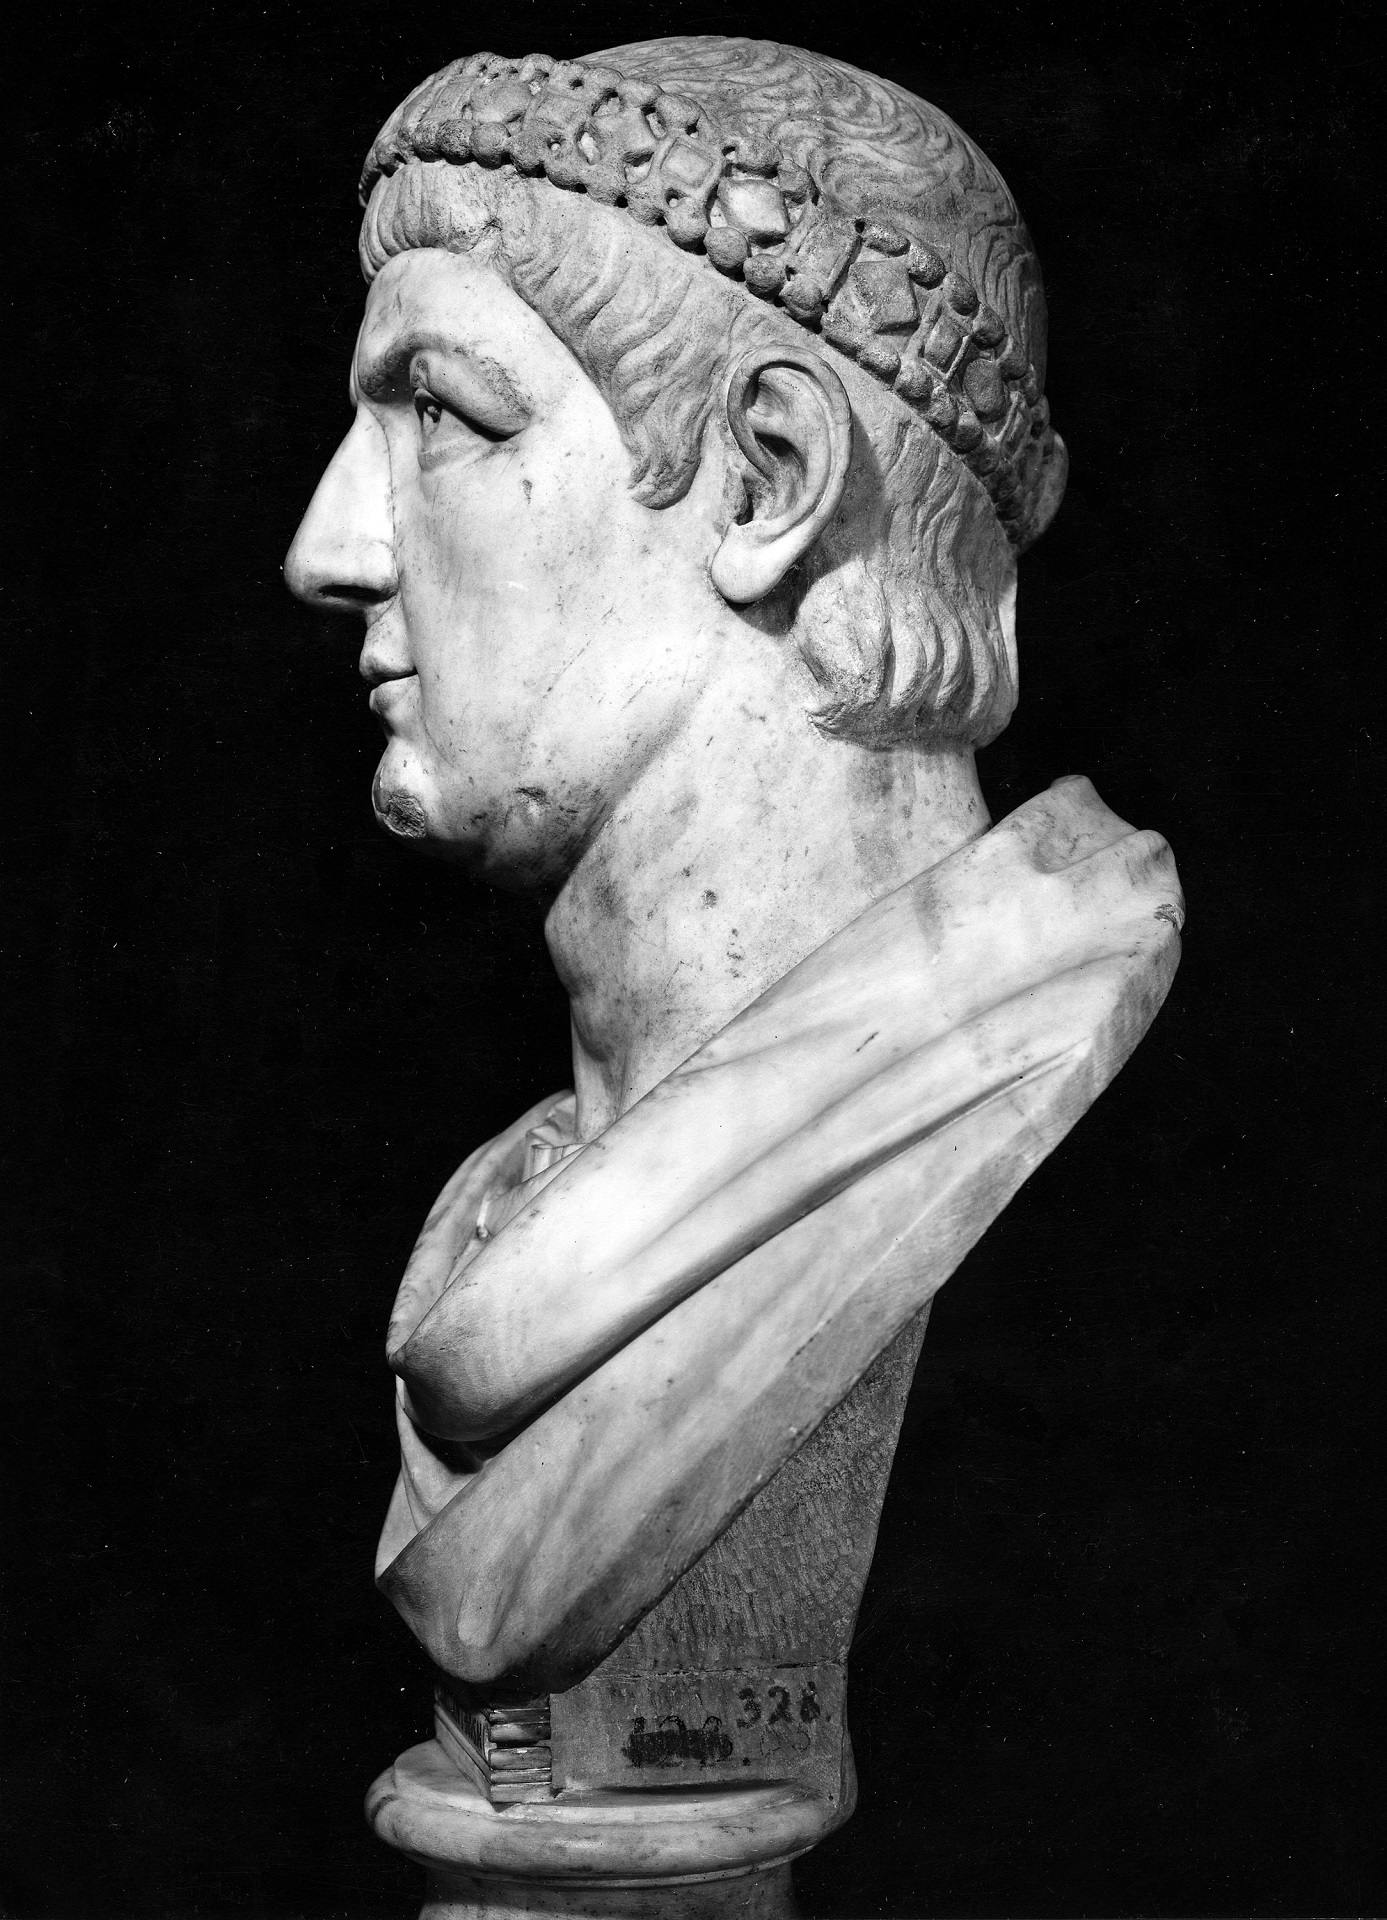 Portrait of Valentinian I or Valens (or Constantine)